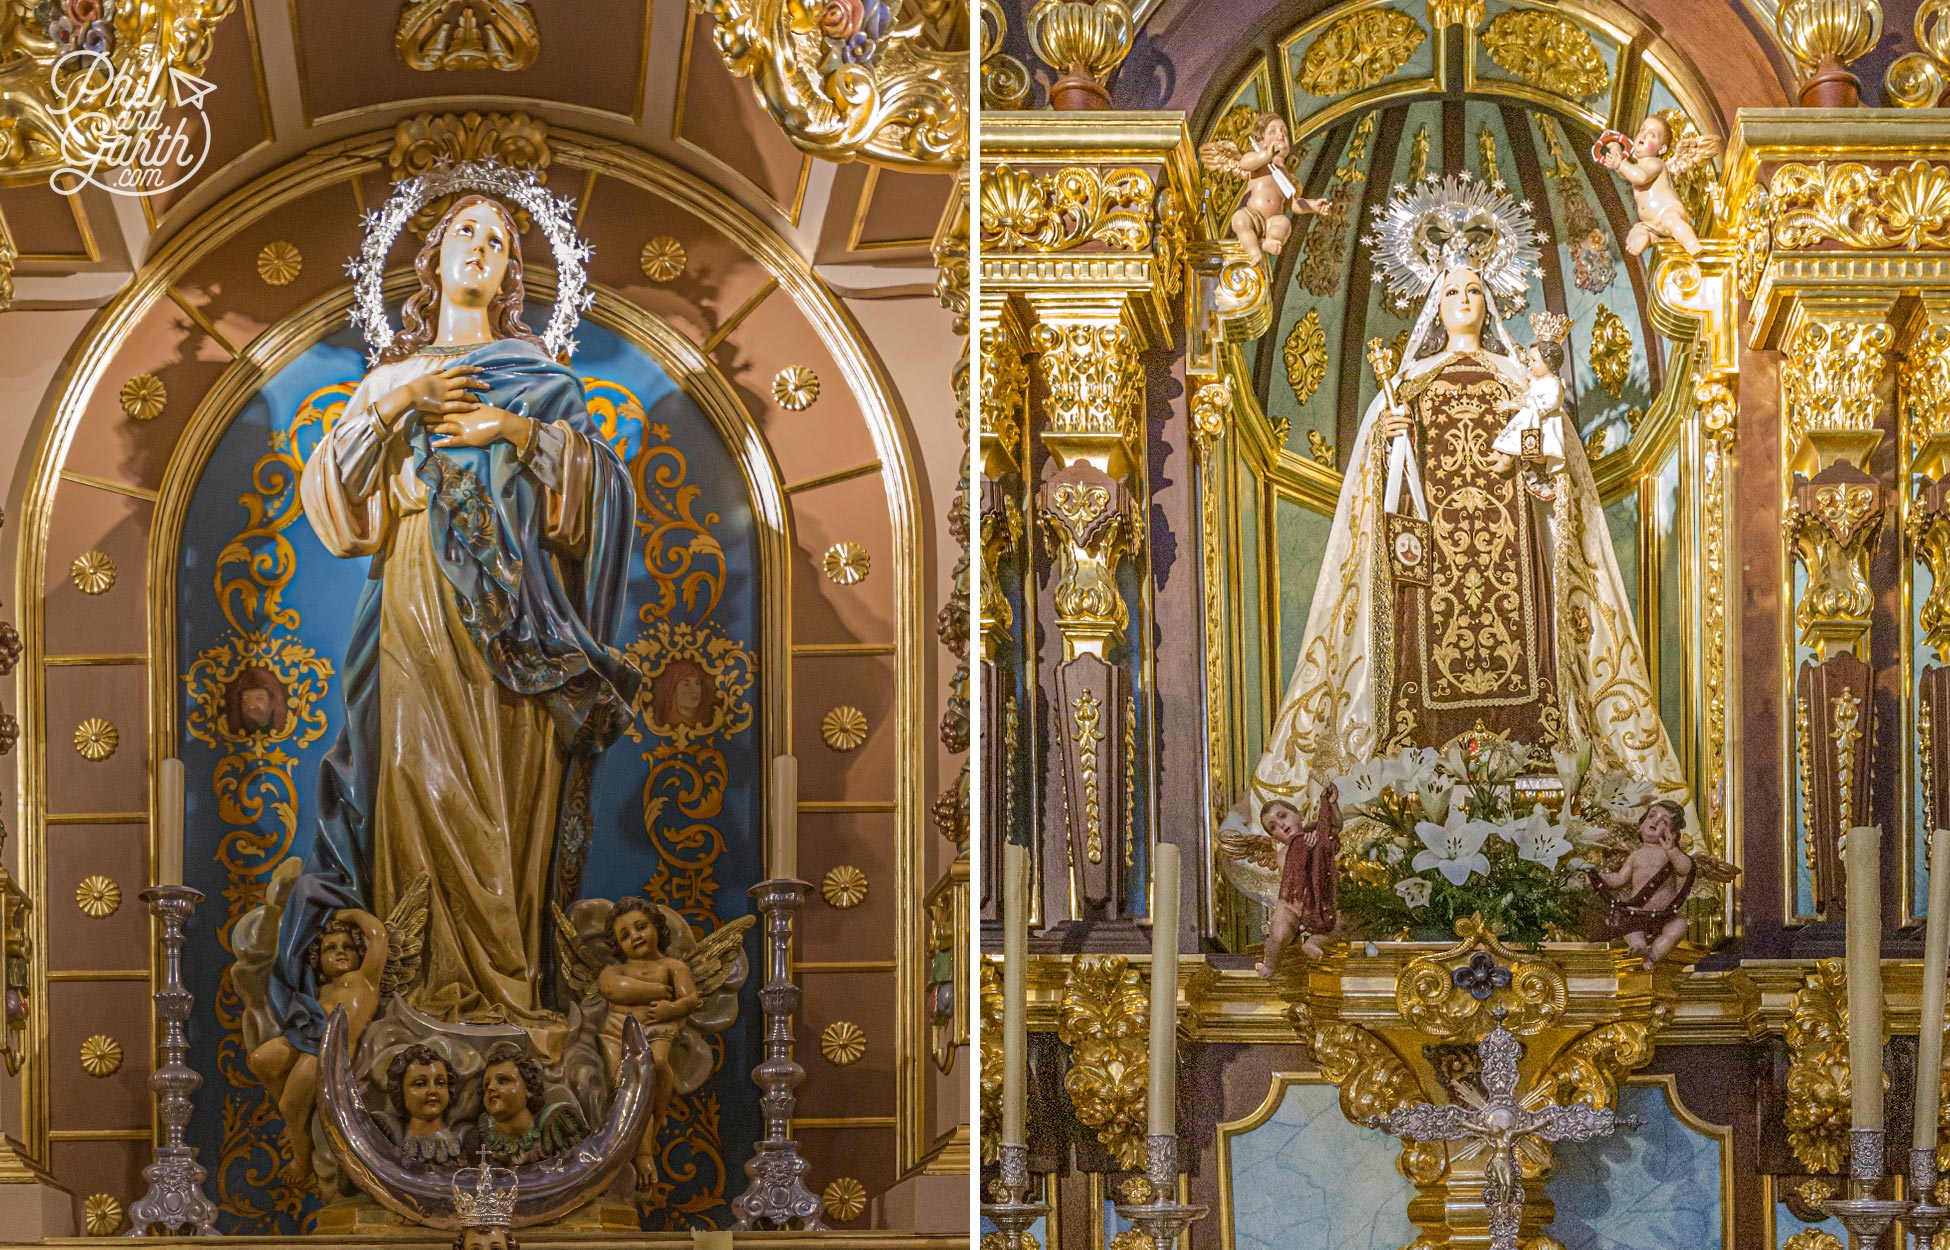 Inside you'll notice the saints are dressed in real clothes, a characteristic of Spanish churches